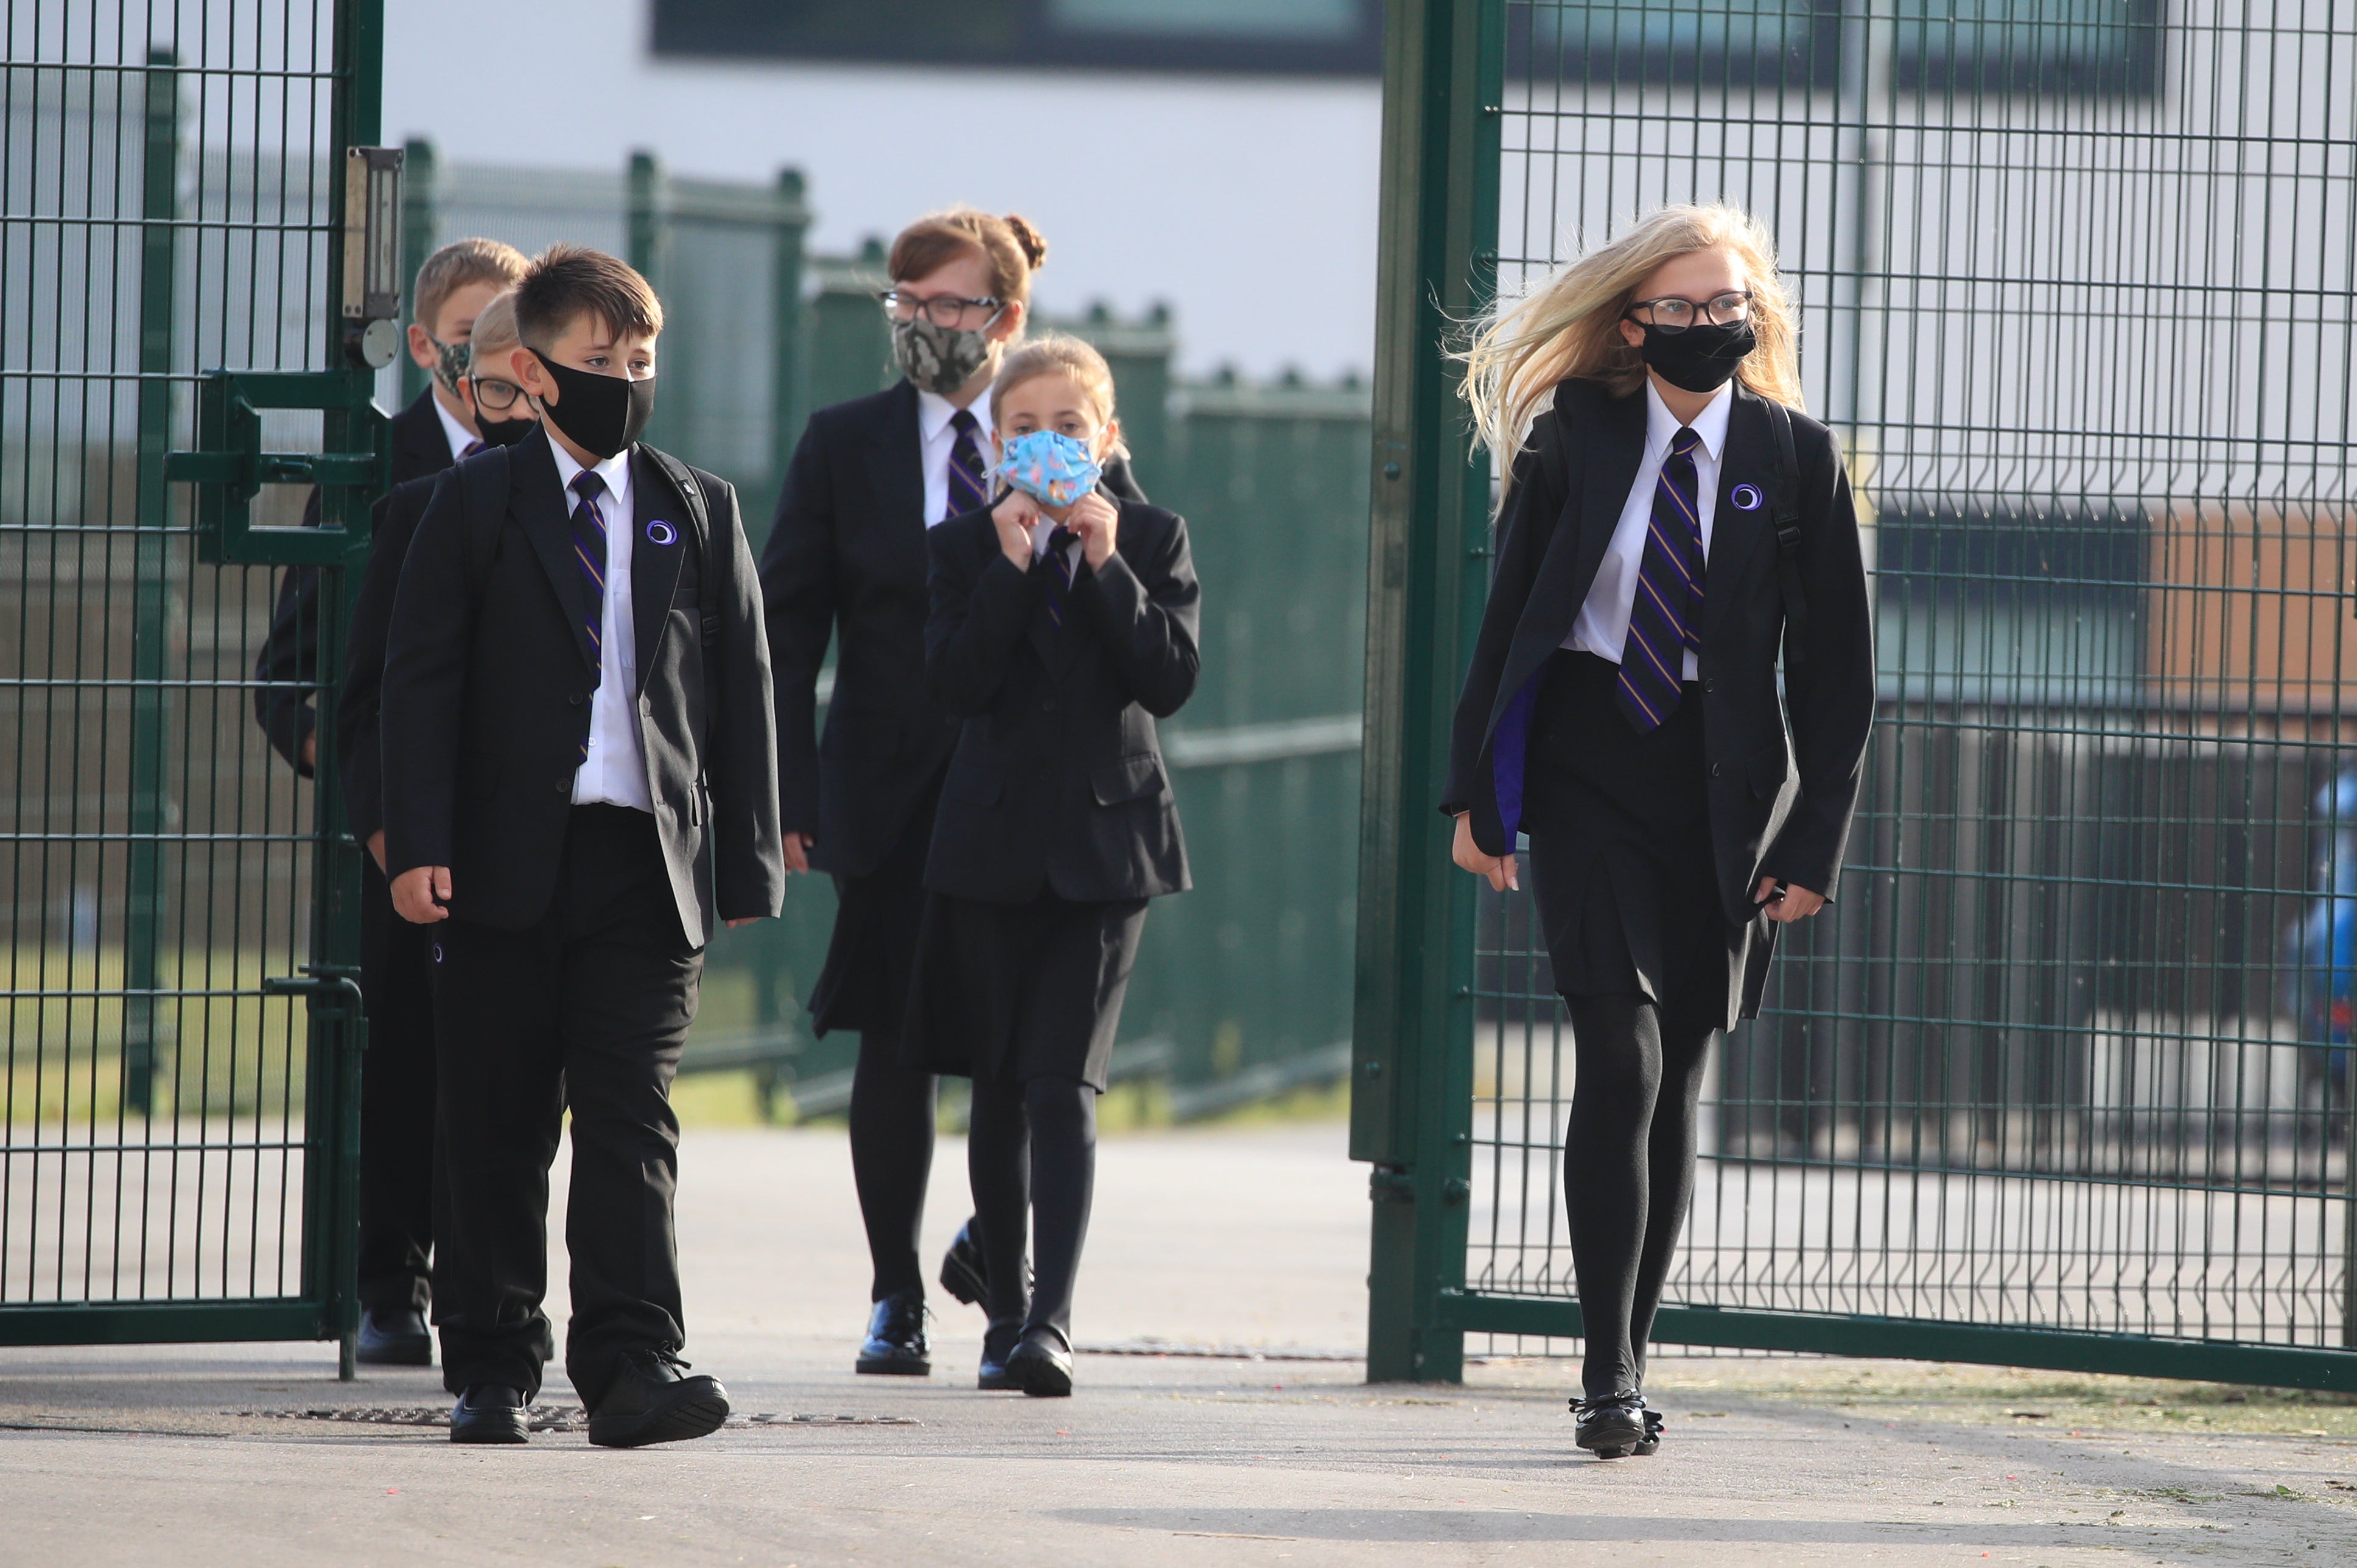 Pupils wear protective face masks on the first day back to school at Outwood Academy Adwick in Doncaster. Data shows that Covid infections remain high, fuelled by children and young teenagers.